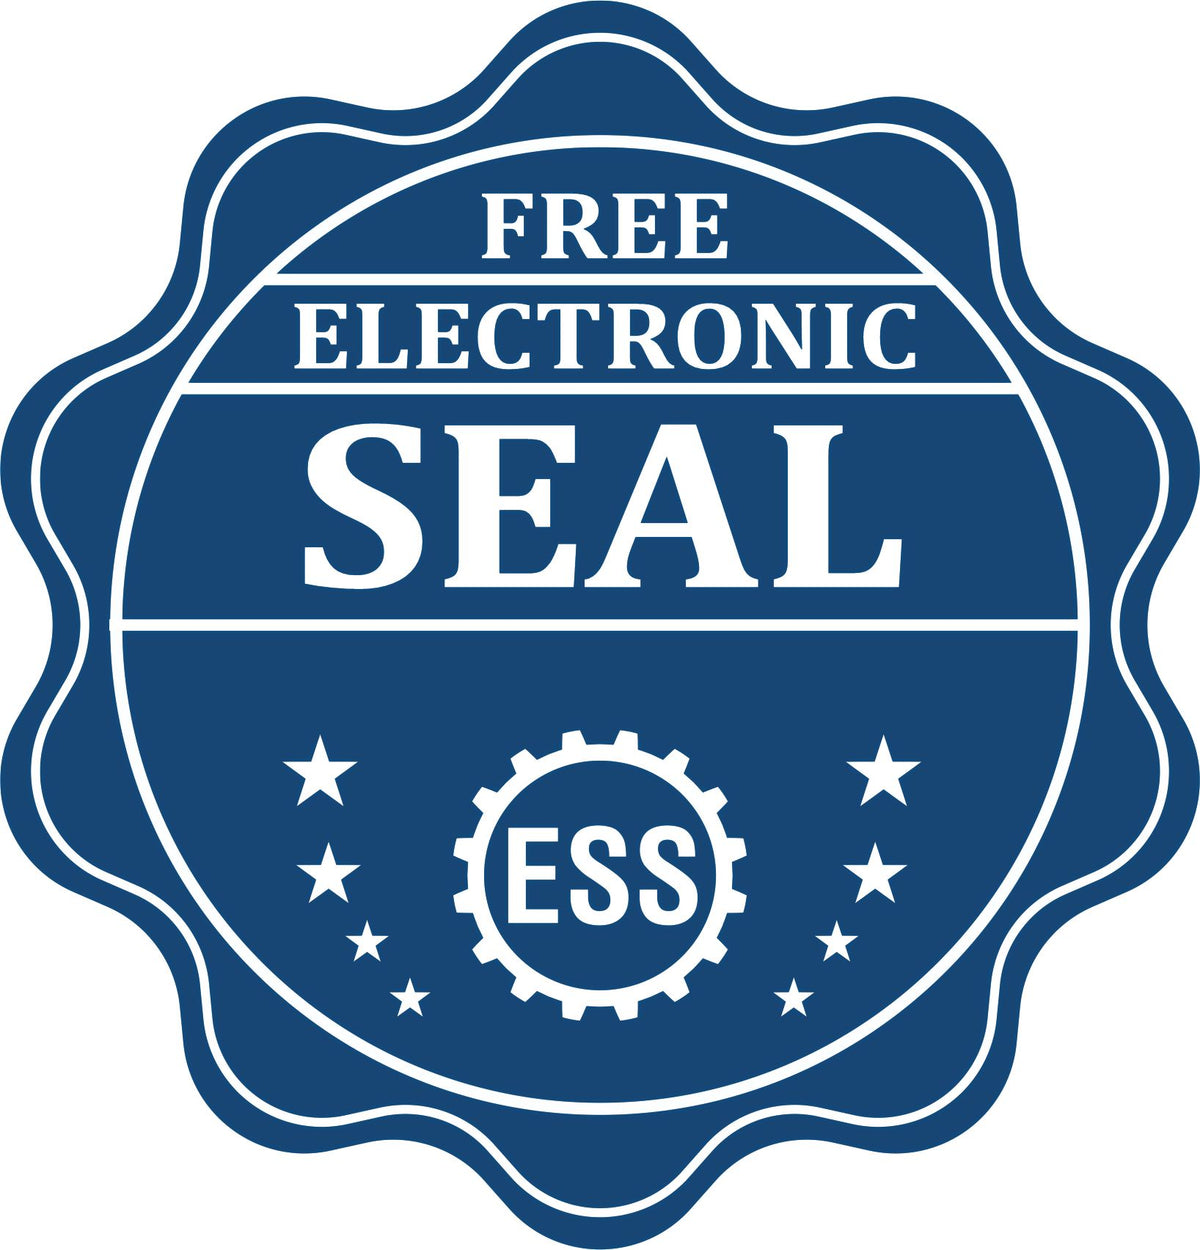 A badge showing a free electronic seal for the Connecticut Professional Engineer Seal Stamp with stars and the ESS gear on the emblem.